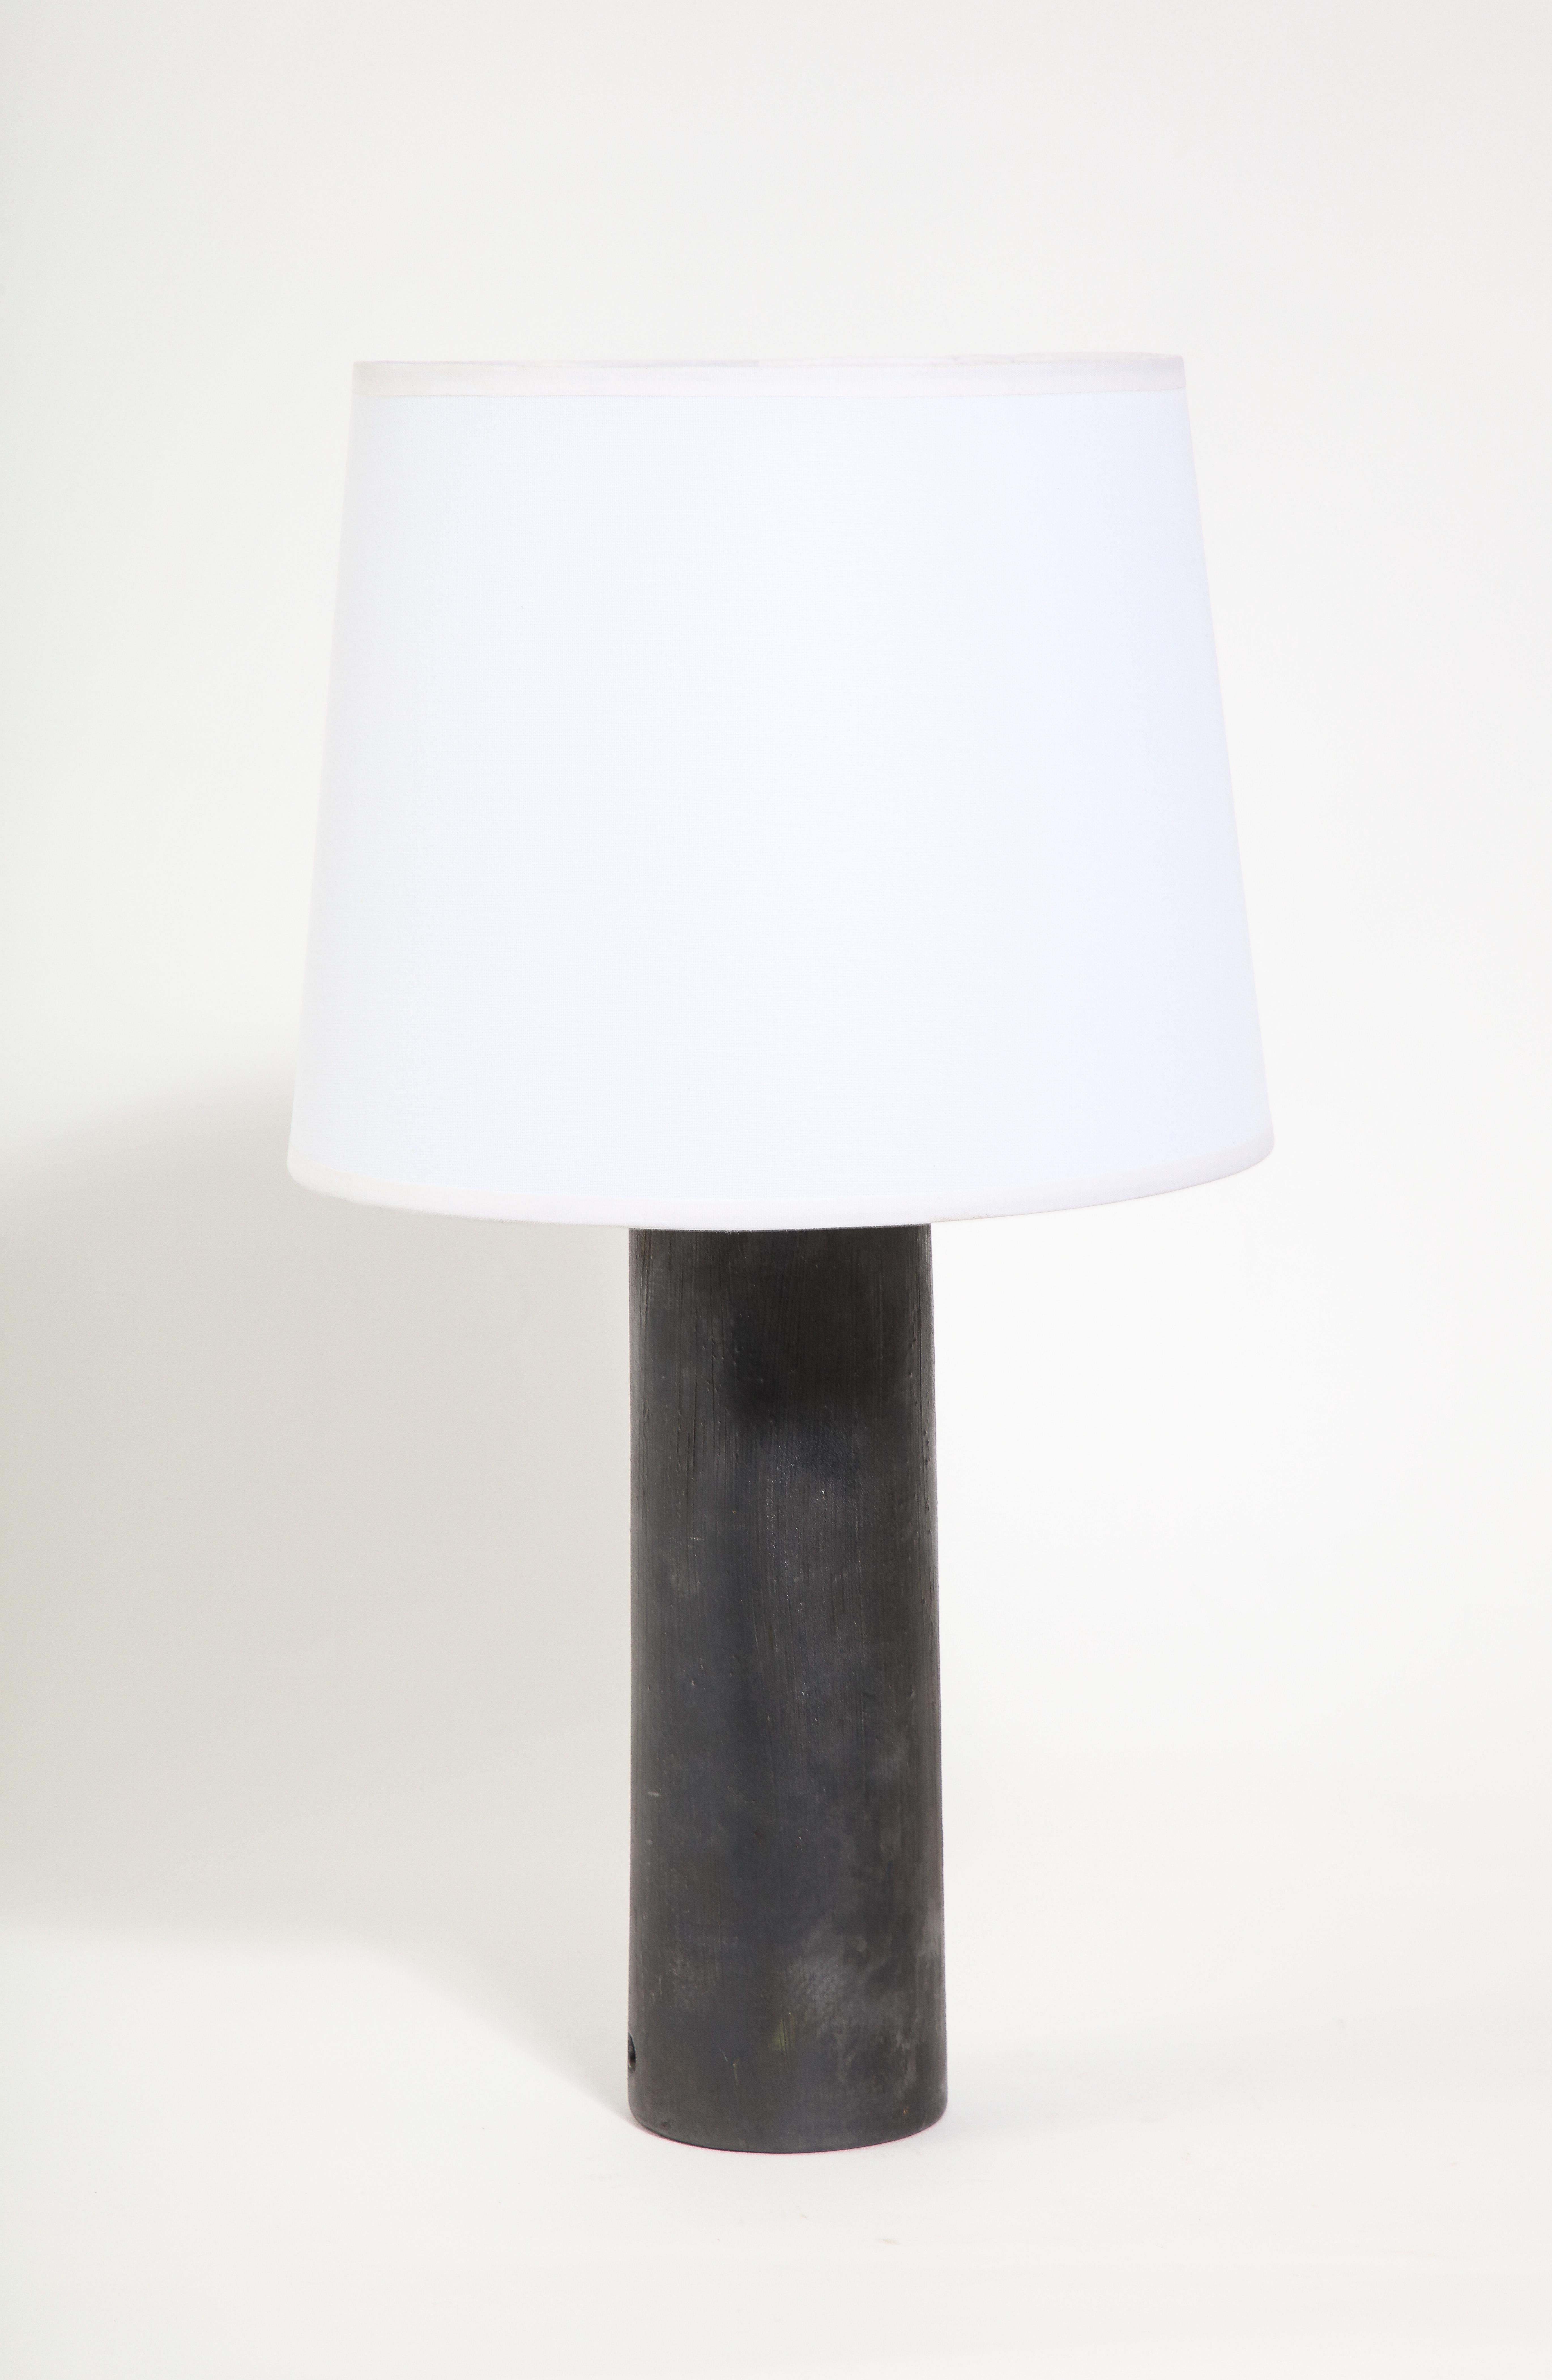 Cylinder ceramic lamp in the manner of Jouve with a metallic Charcoal glaze.
